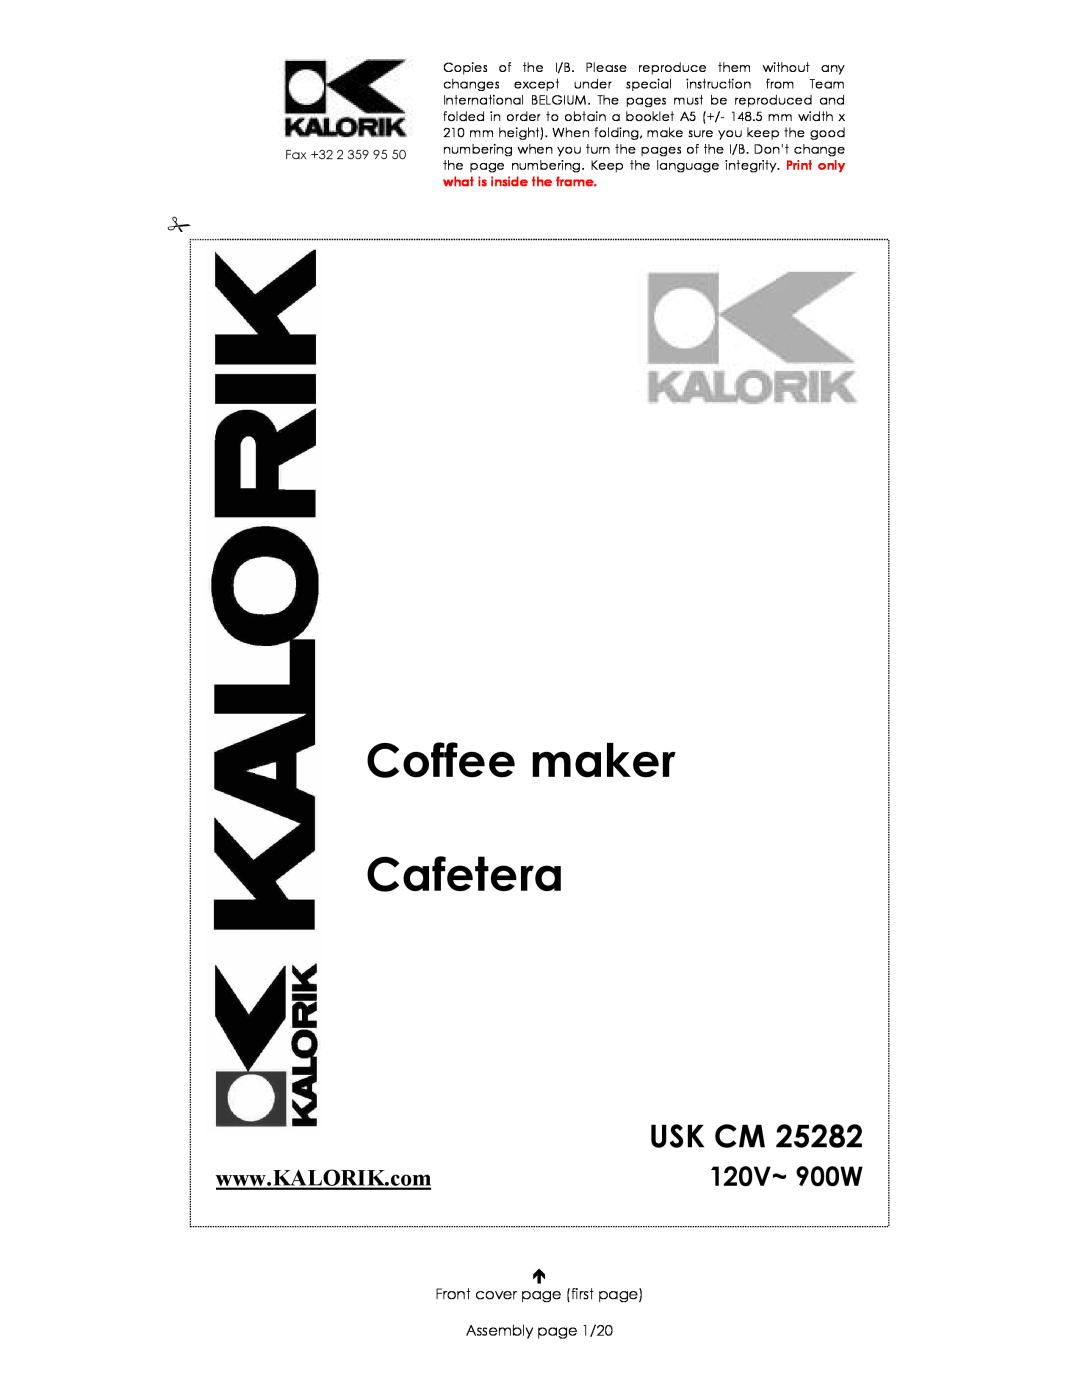 Kalorik USK CM 25282 manual 120V~ 900W, Coffee maker Cafetera, Usk Cm, Front cover page first page Assembly page 1/20 